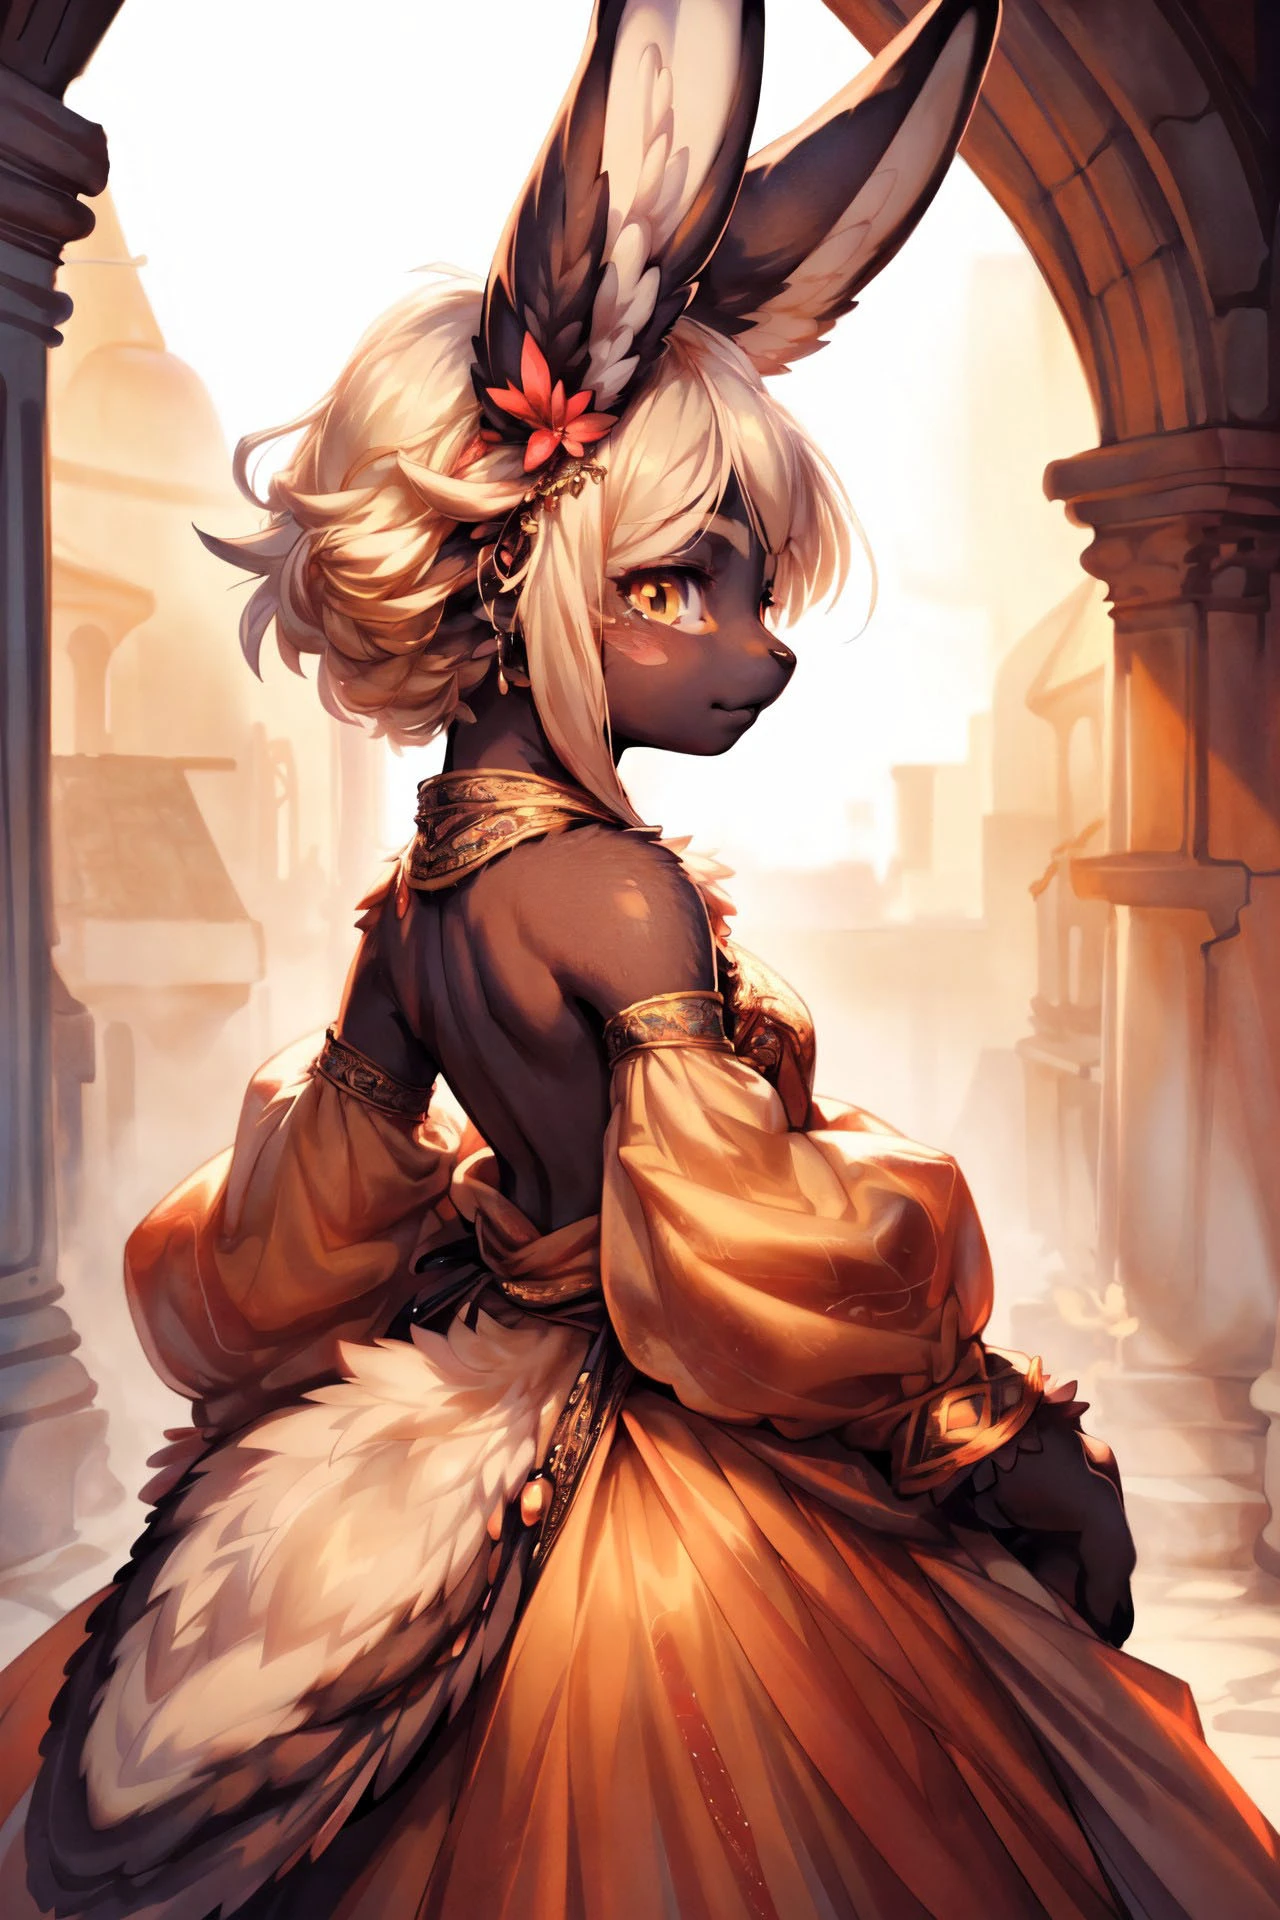 (wildlife photography), masterpiece,
rear view, backside, seen from behind, high angle, solo,
(furry) (anthro) female,  (rabbit), nanachi \(made in abyss\),
(bunny), bilac, brown fur, short hair, brown hair, yellow eyes, suspenders, bandages, rabbit ears, orange pants,
detailed and extremely fluffy body fur, glossy fur, young adult, thick thighs, cute,
hair ornament,
standing, hands on hip,
Mischievous,
bow ribbon,
Butterfly Monarch Gown, Flowing gown in vibrant hues mimicking butterfly wings, delicate patterns and wing-shaped sleeves,
uploaded on e621, by Anixaila, by Youjomodoki, by Demicoeur, by castitas, by darkgem, (by dagasi:0.5), by cotora,
furrycore,
harem outfit,
blackskin,
[star_butterfly, blonde_hair, ],
morning,
eerie Gothic grand cathedral, stained glass windows, god-rays, mist,
Smooth weathered driftwood scattered along the high-tide line,
Enchanted Suit of Armor, suit of armor adorned with enchanted symbols,
cinematic composition, hi res, 8k, cinematic lighting, stunningly beautiful, concept art, highly detailed,
masterpiece, best quality, realistic, (intricate:0.9), (high detail:1.4), film photography, sharp focus,